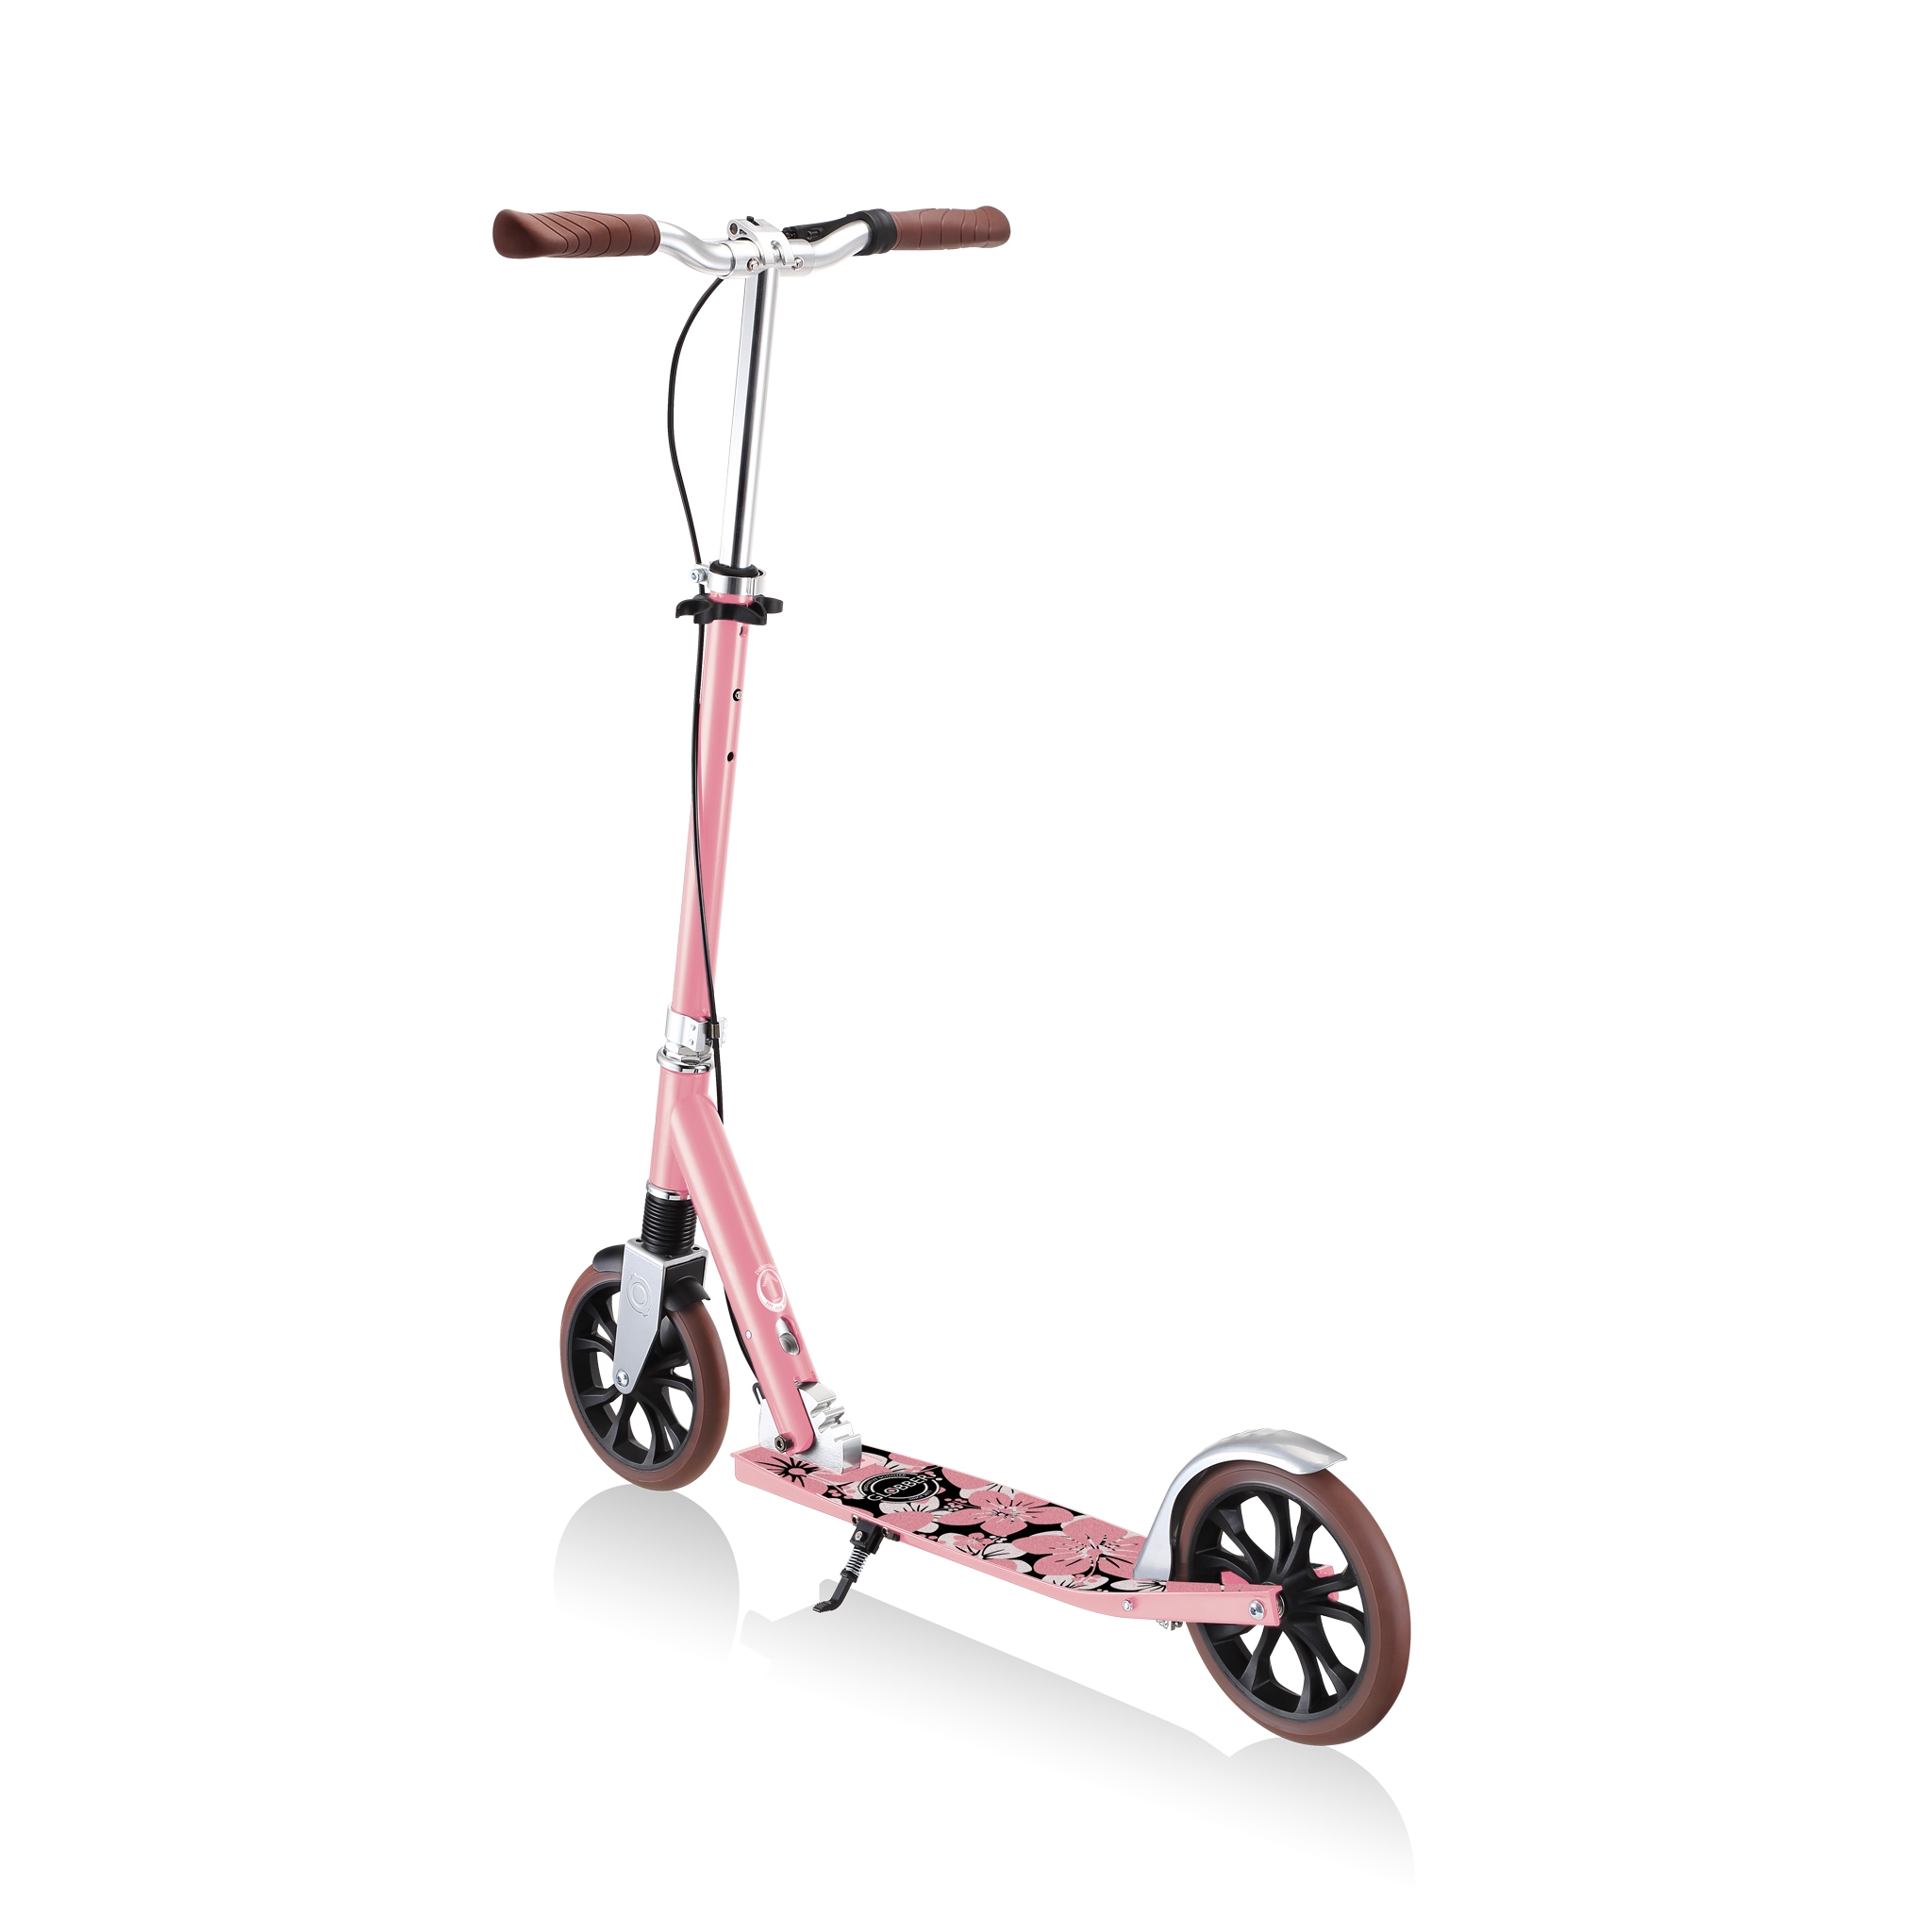 Globber-NL-205-DELUXE-big-wheel-scooter-for-kids-with-front-suspension 5